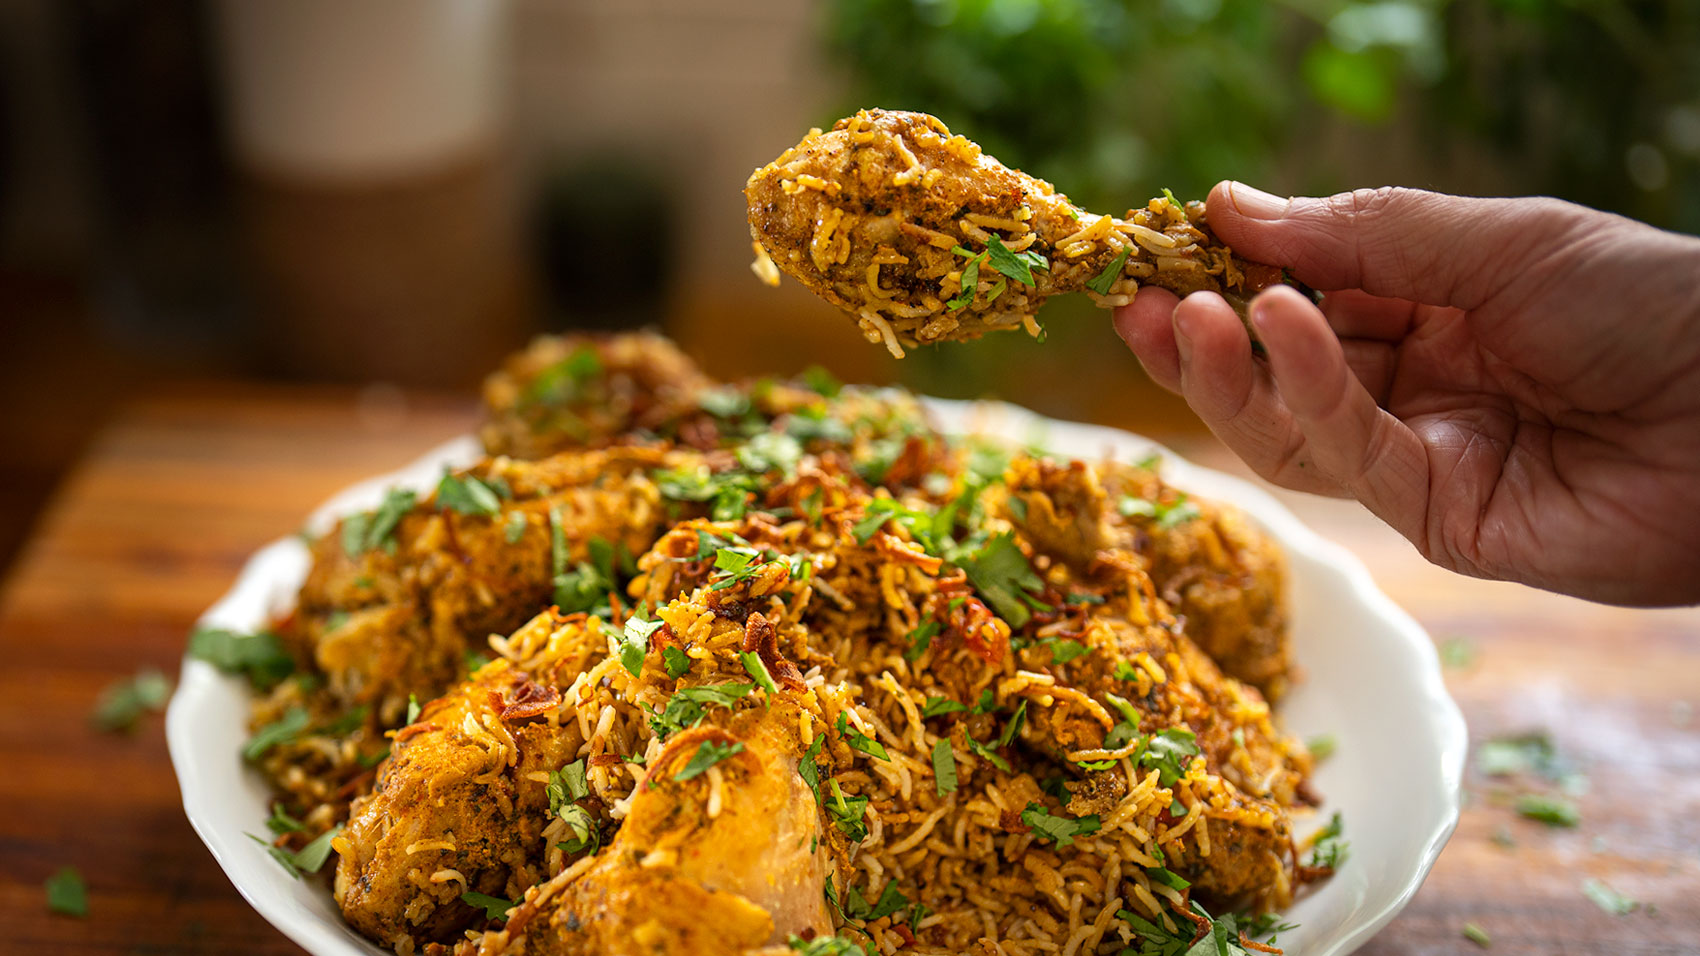 Wondering where to get a great biryani in SA? We've got an epic list to delight your taste buds